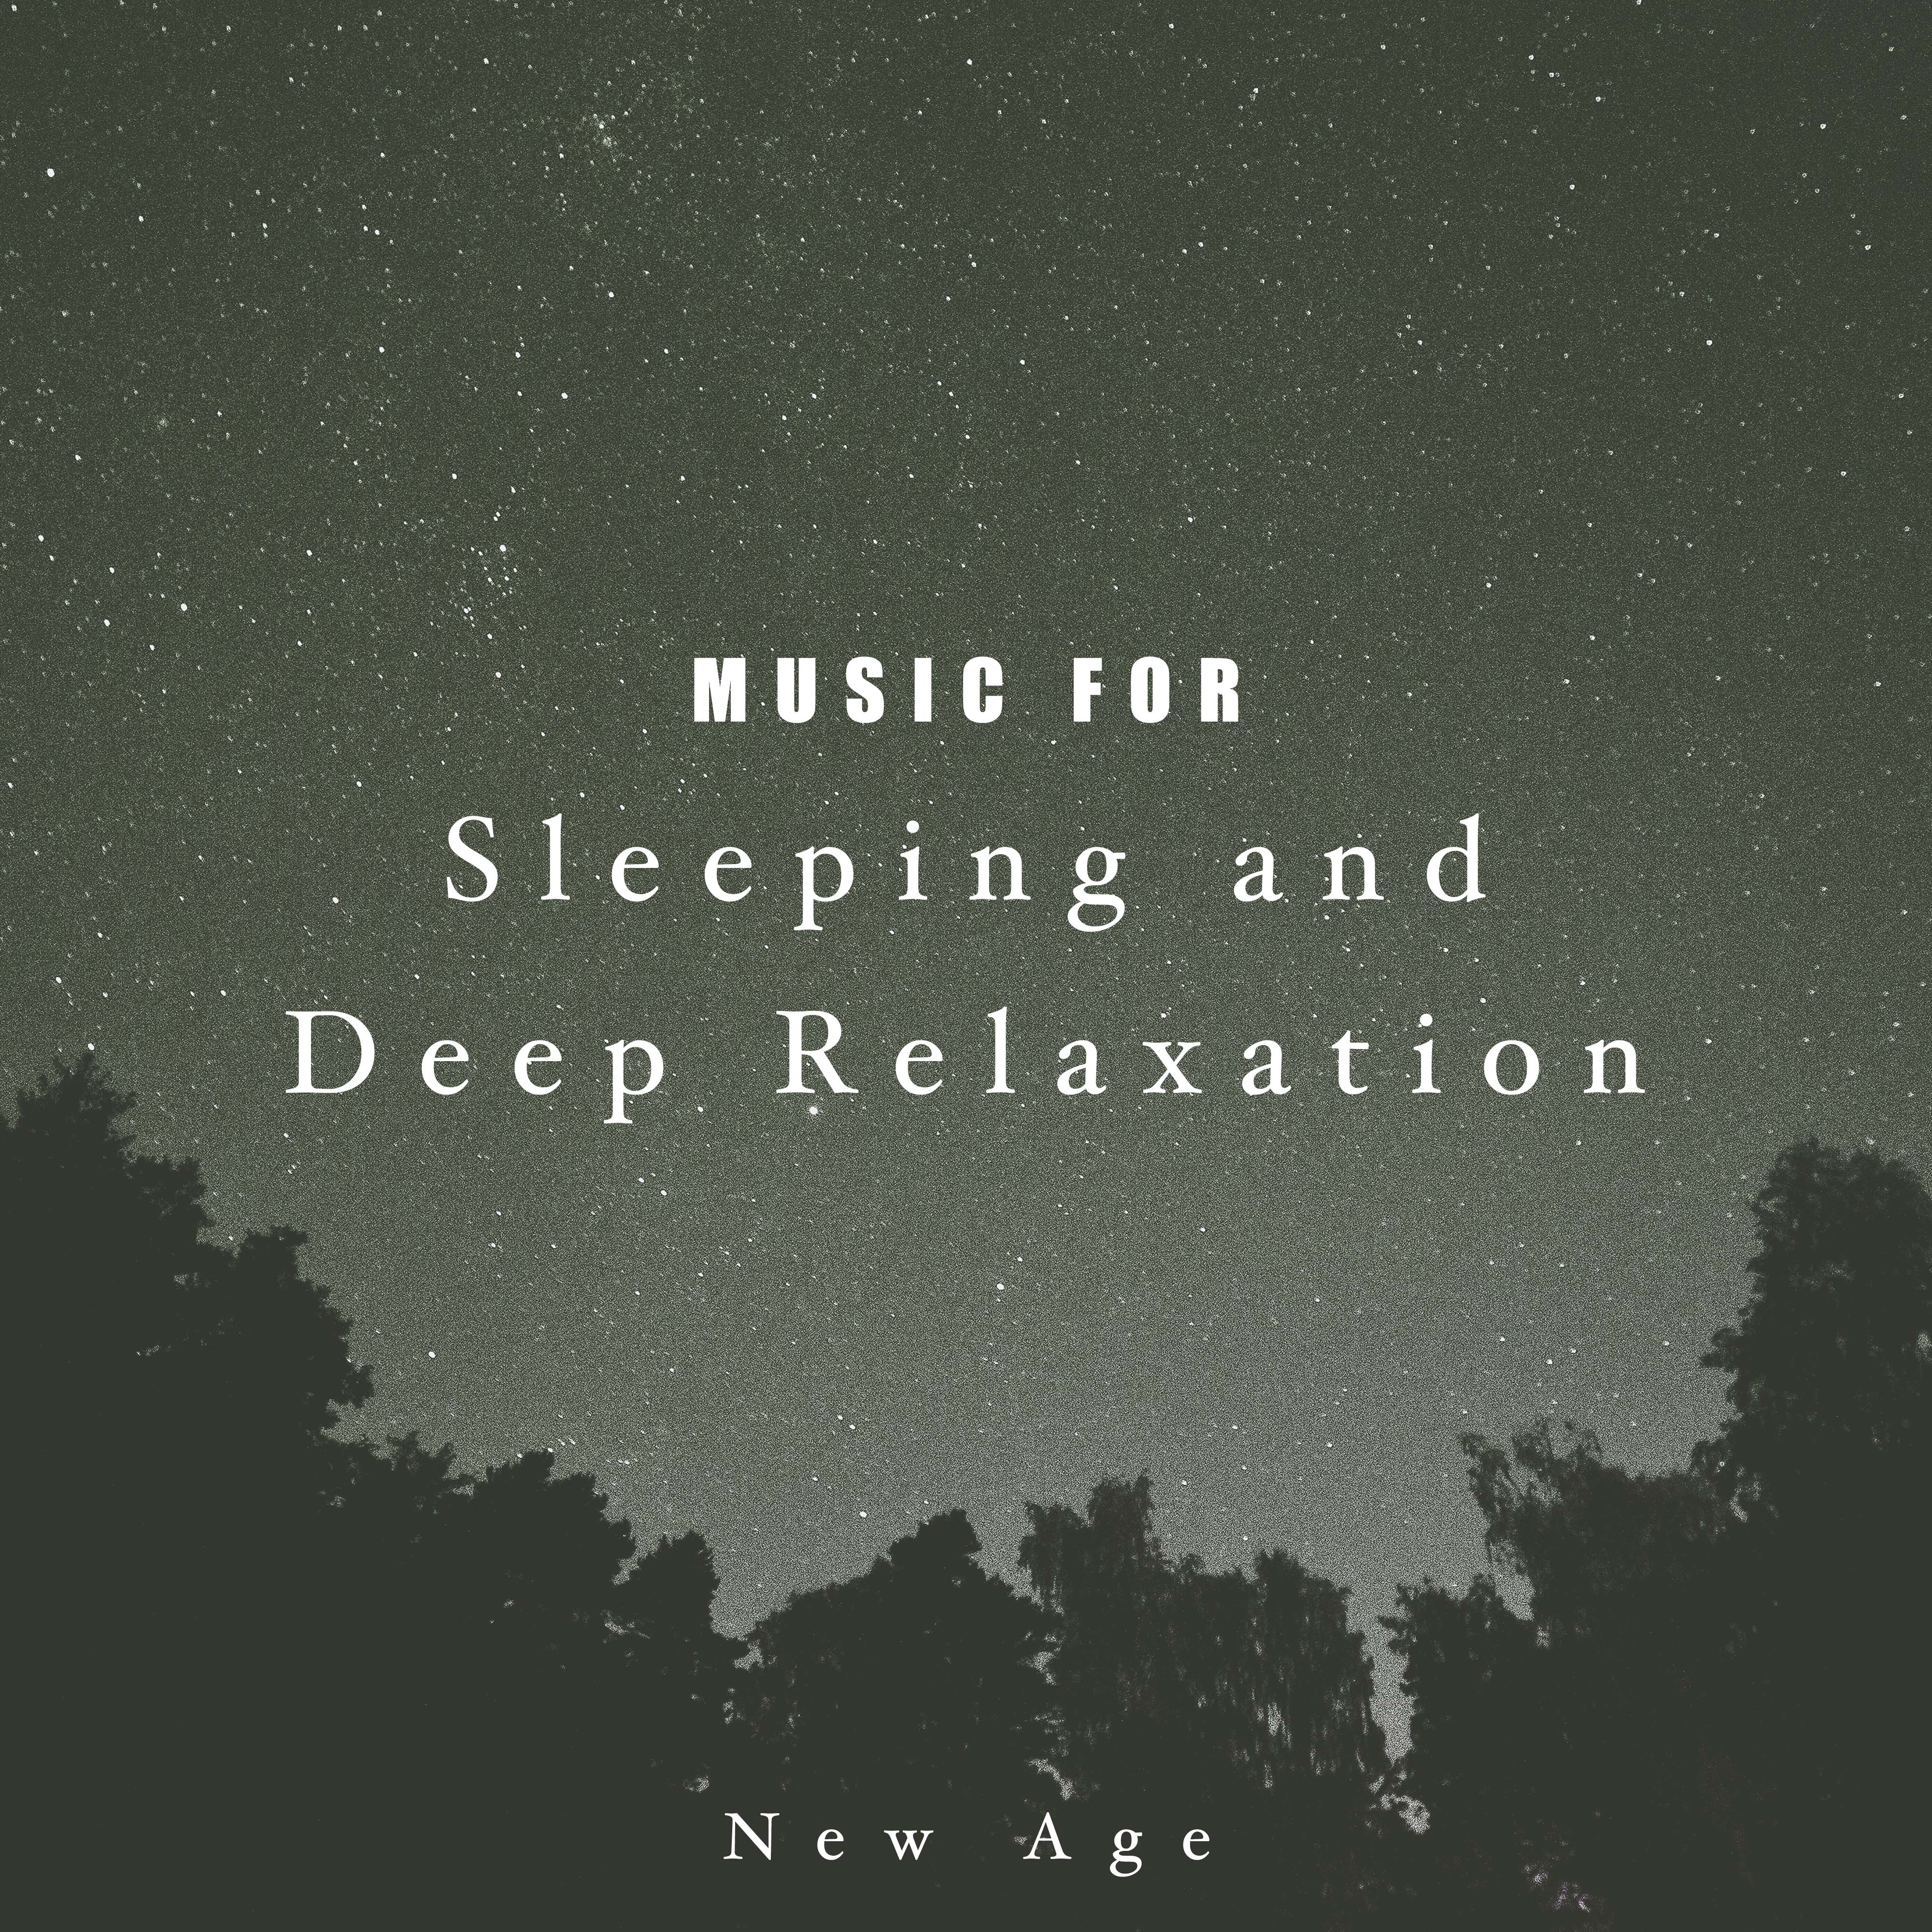 Music for Sleeping and Deep Relaxation